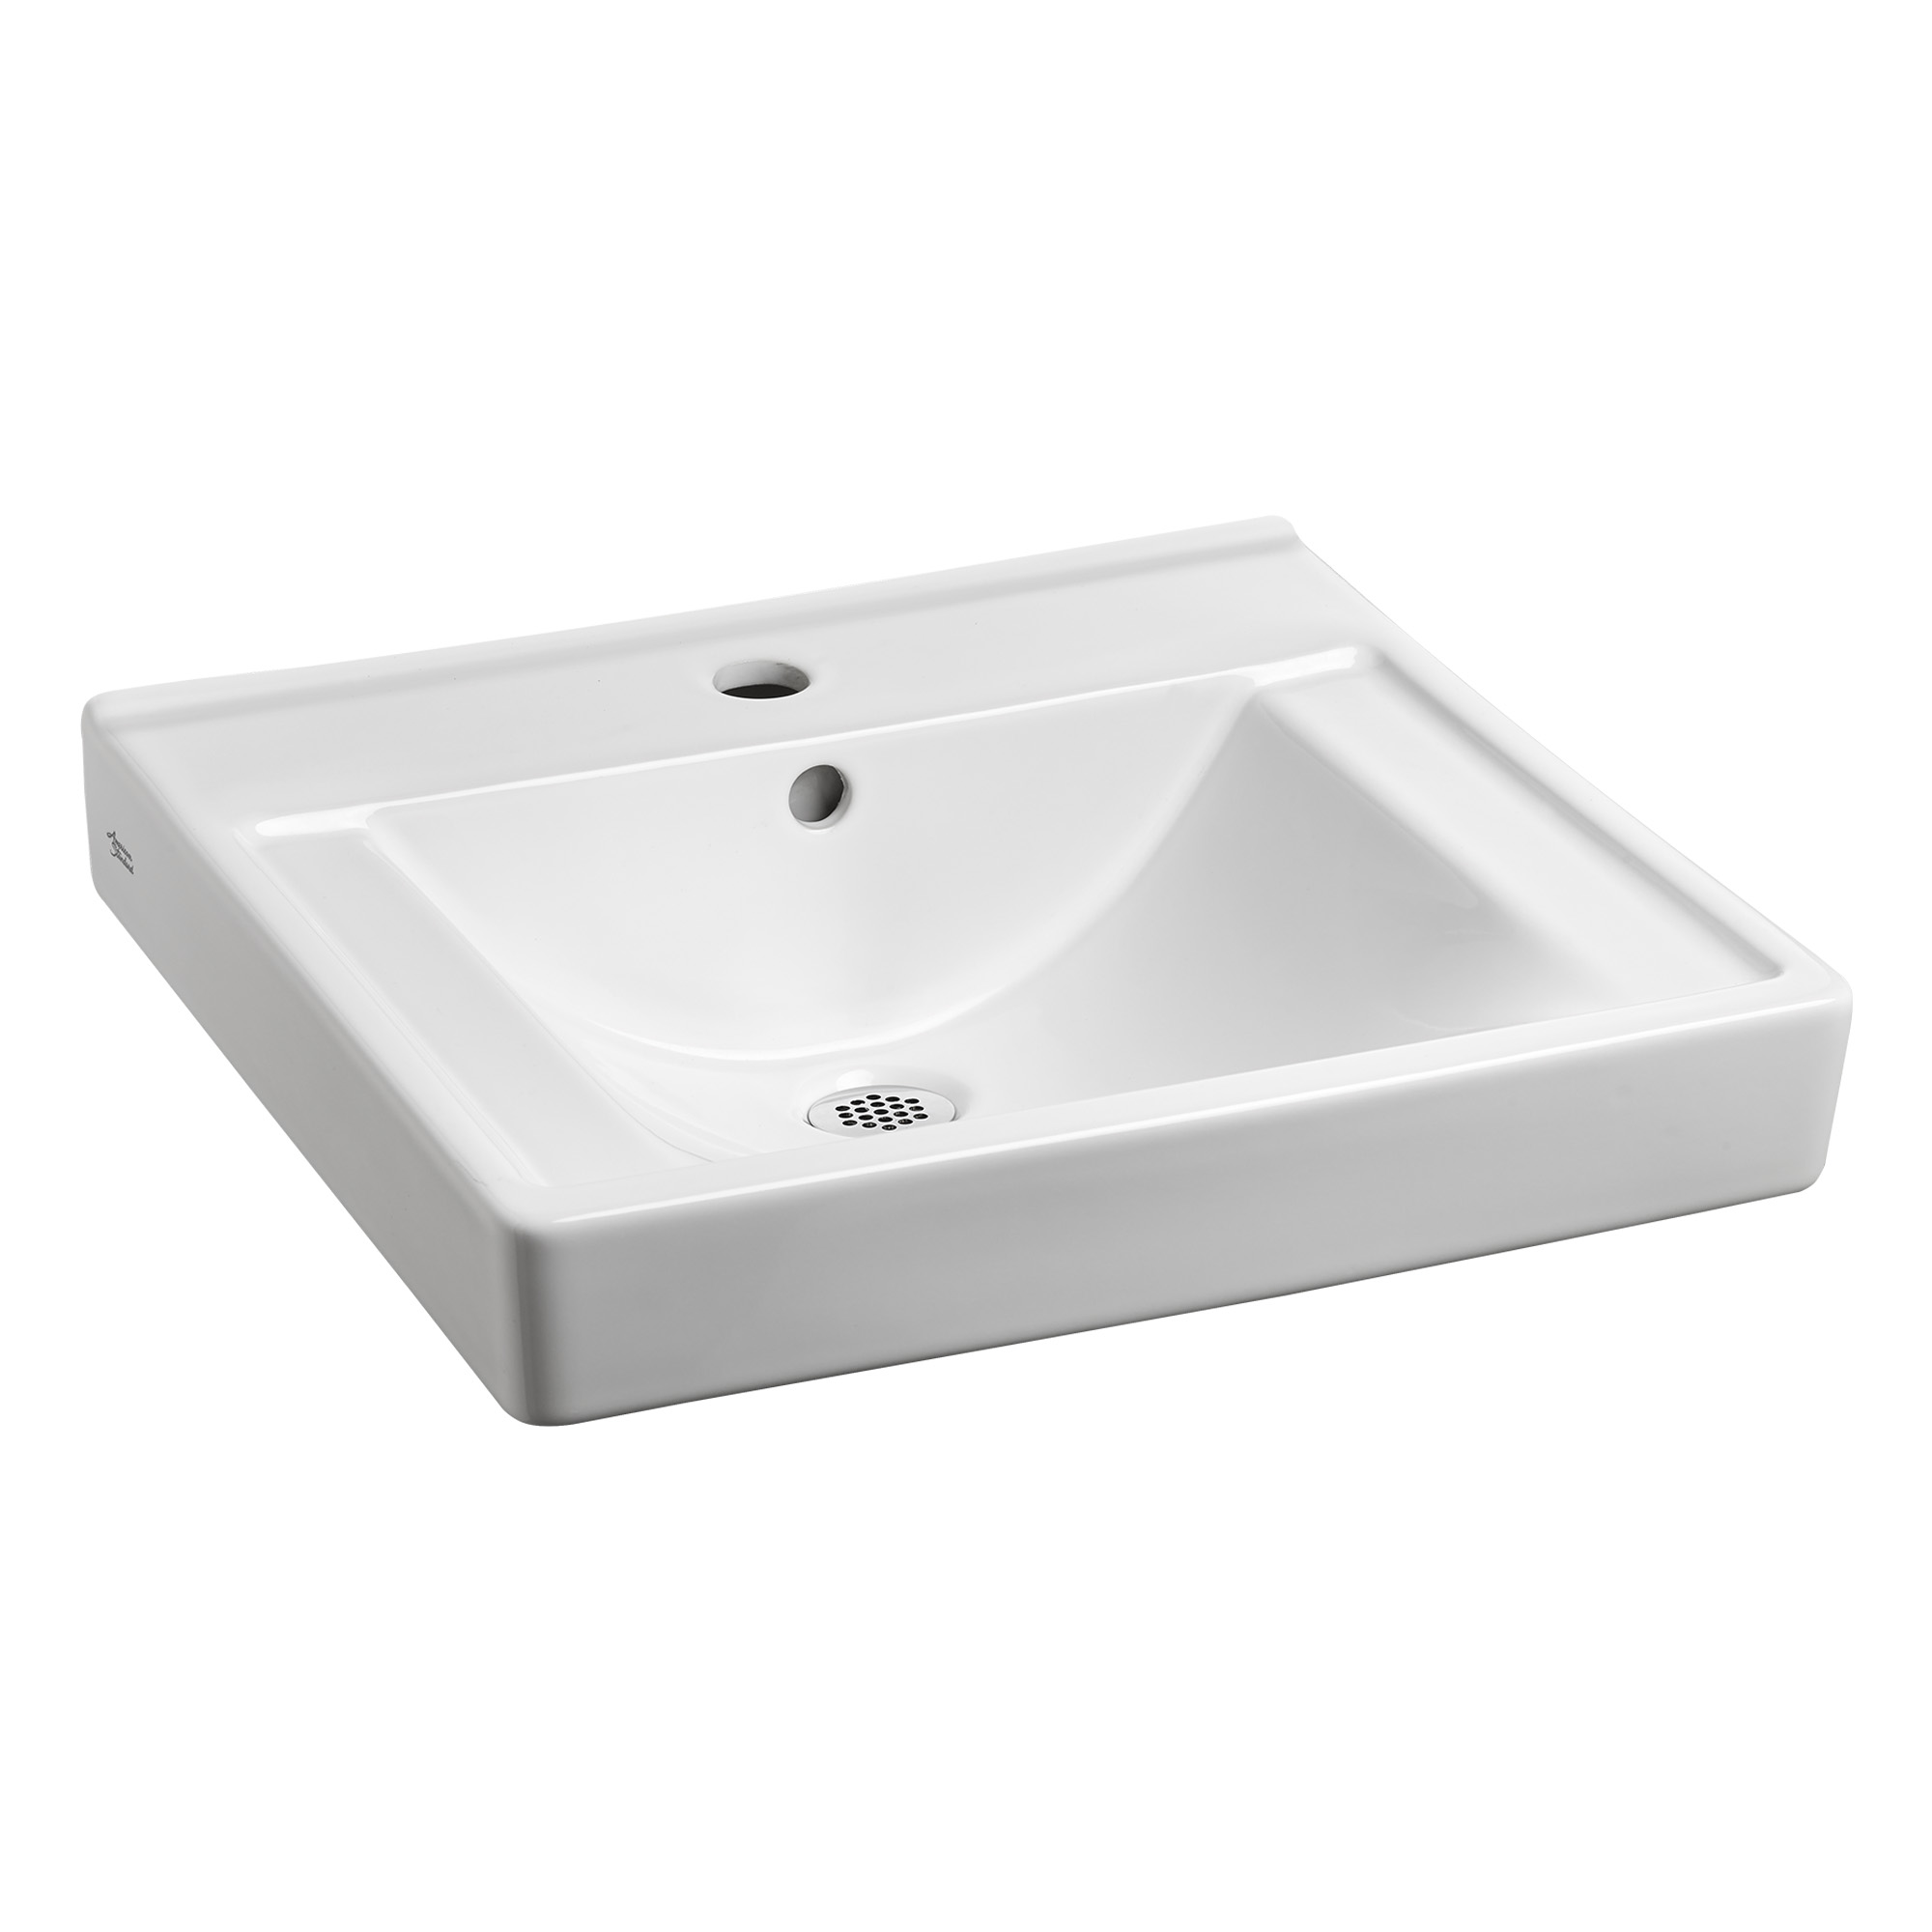 Decorum 20x18-1/4" Wall-Hung Lav Sink in White w/Center Faucet Hole